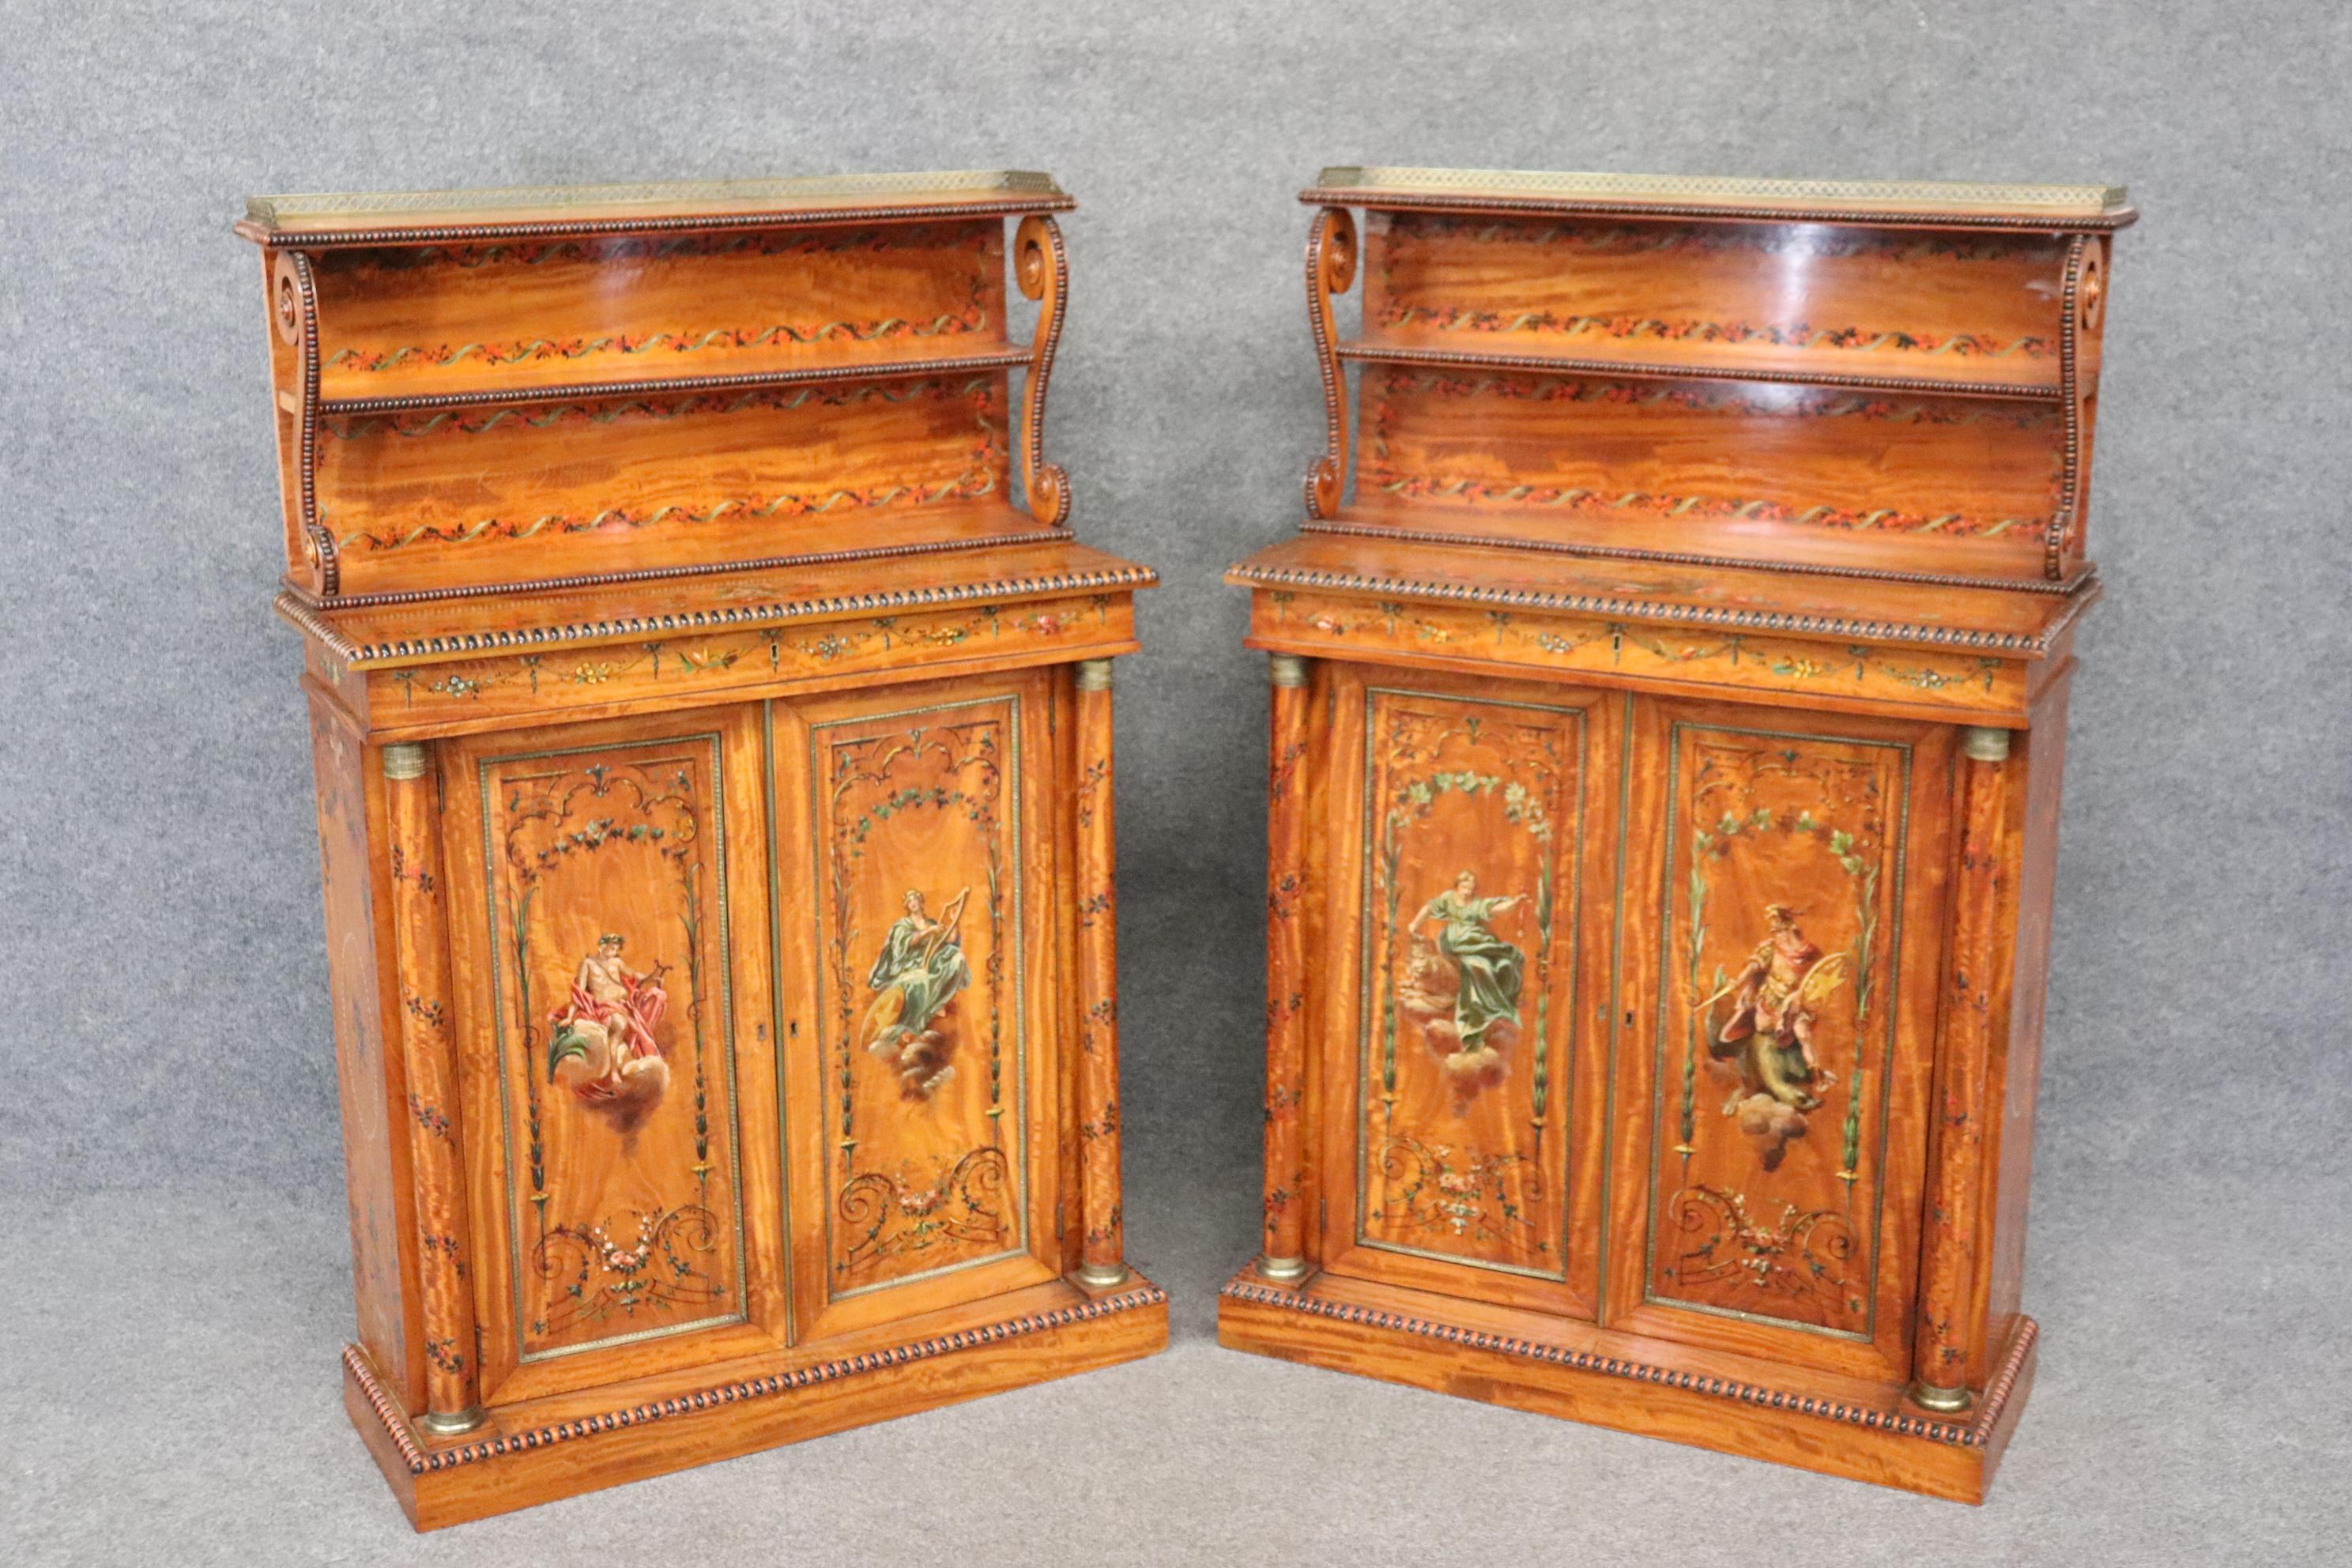 This is an exceptional and truly rare pair of paint decorated solid satinwood side cabinets. They date to the 1890s era and are in good conditon for their age and have no issues beyond normal minor signs of age and use. They measure 51.5 tall x 34